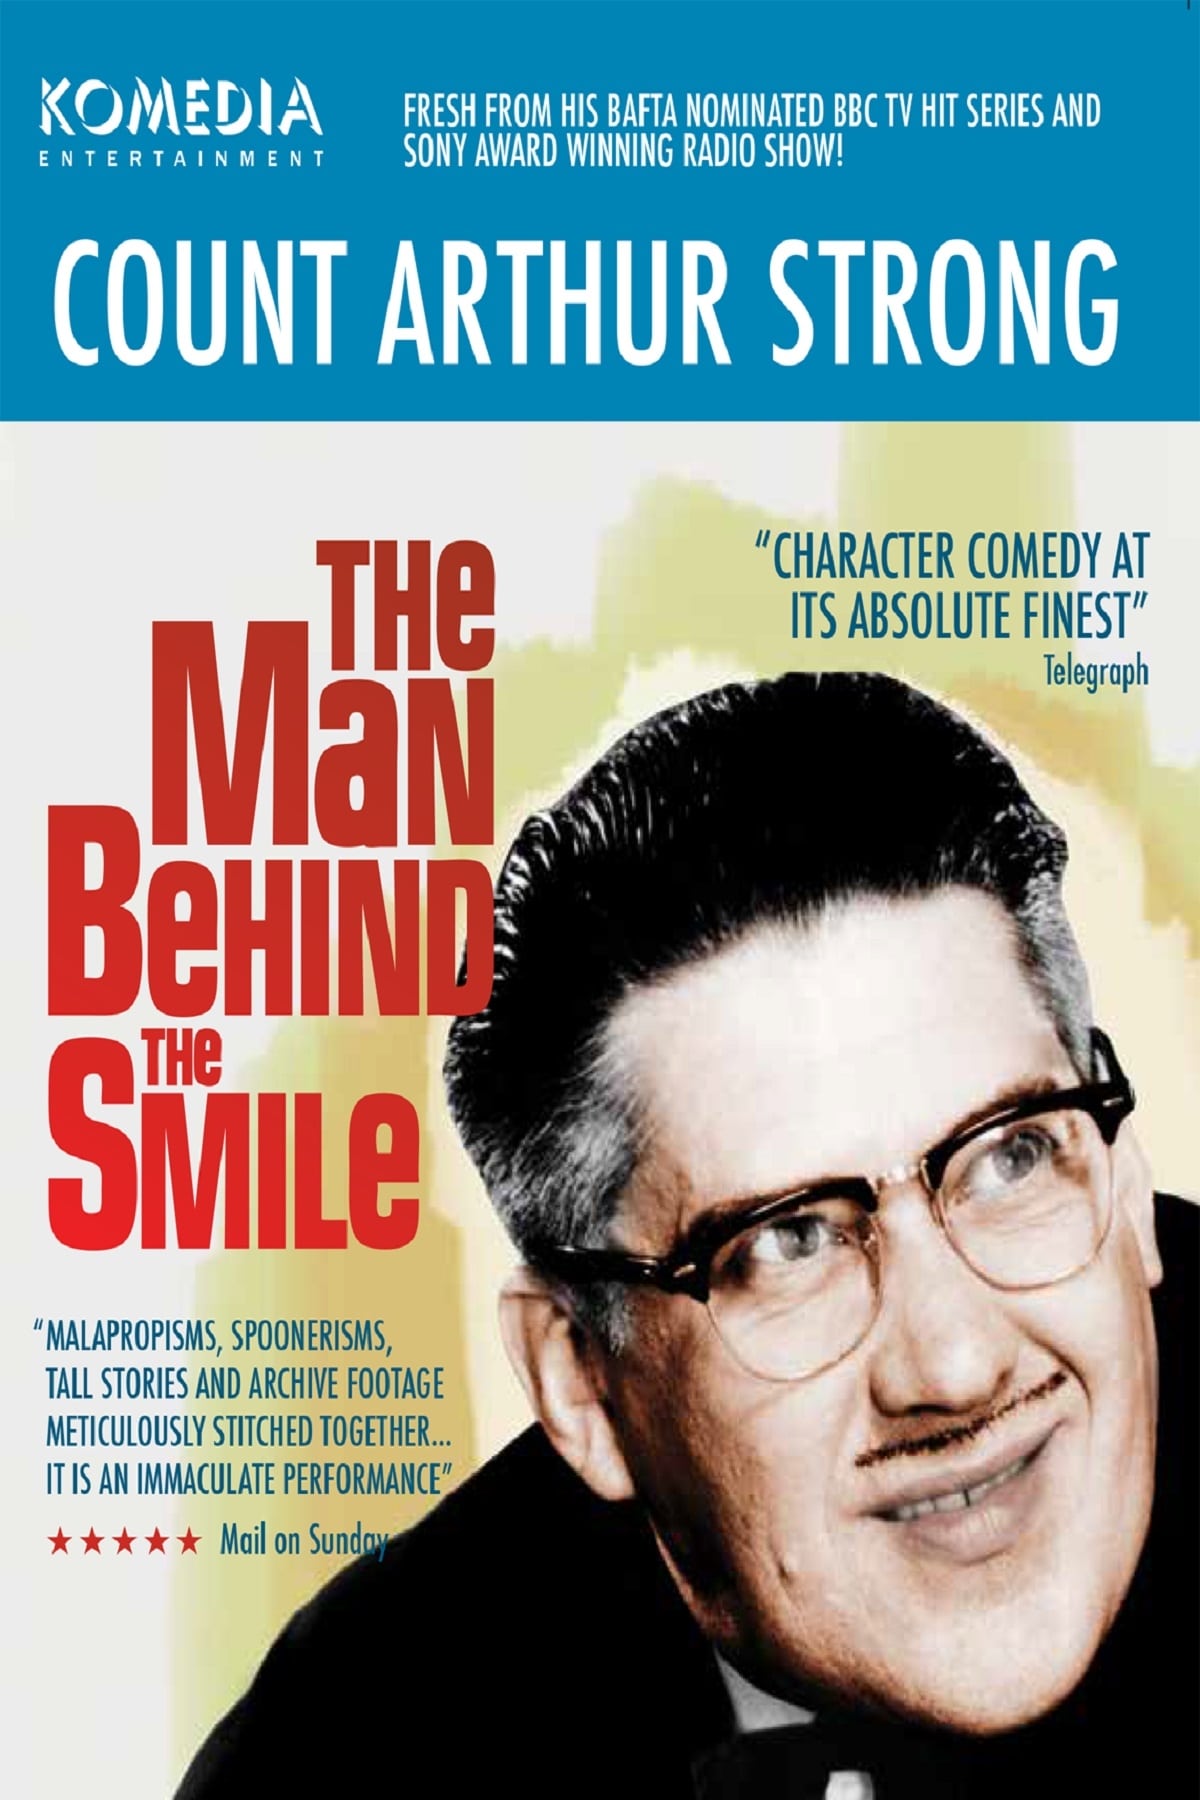 Count Arthur Strong - The Man Behind The Smile